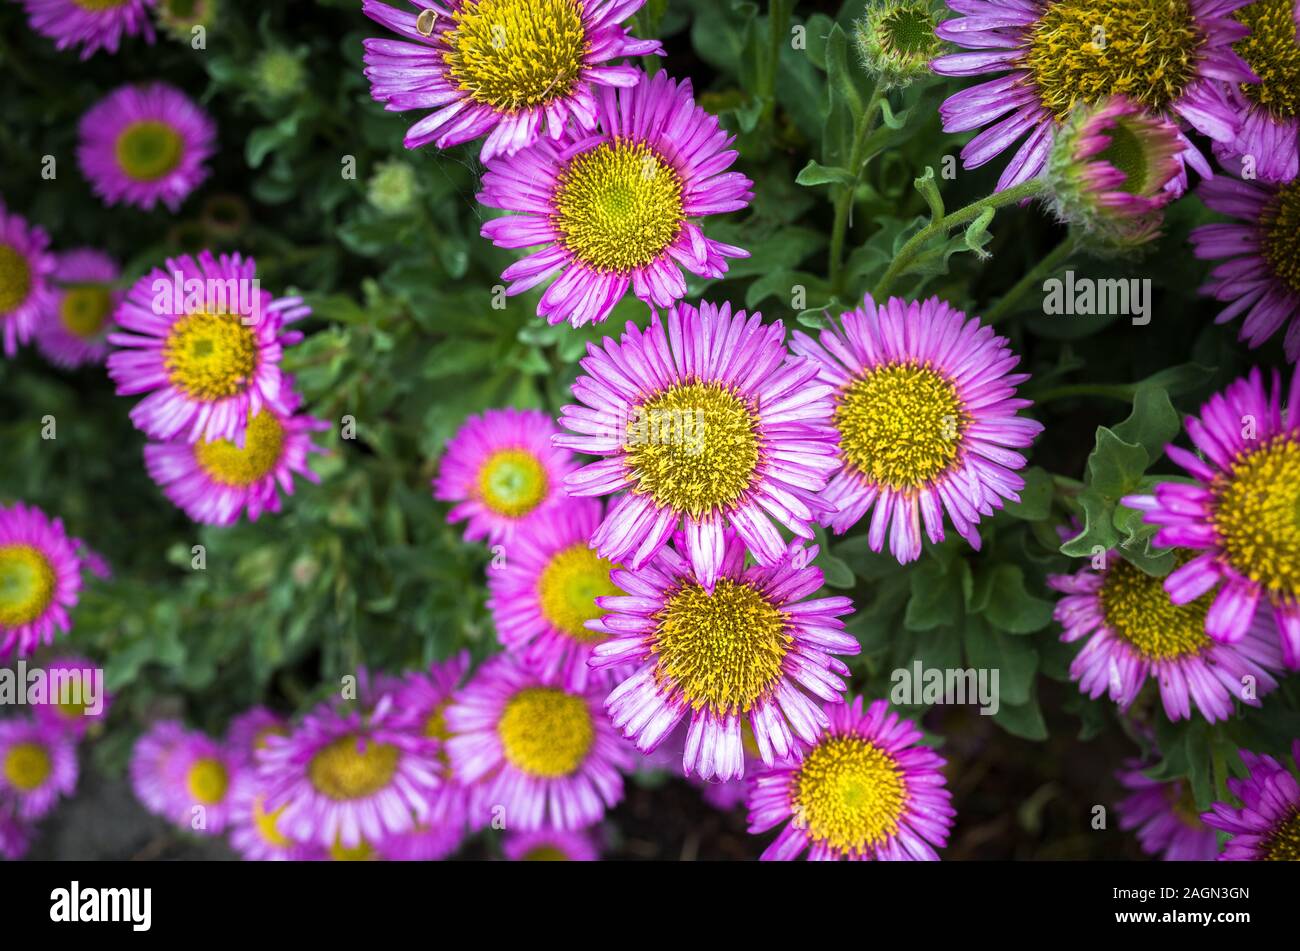 Pink flowers of the Erigeron glaucus or Sea Breeze plant. Stock Photo